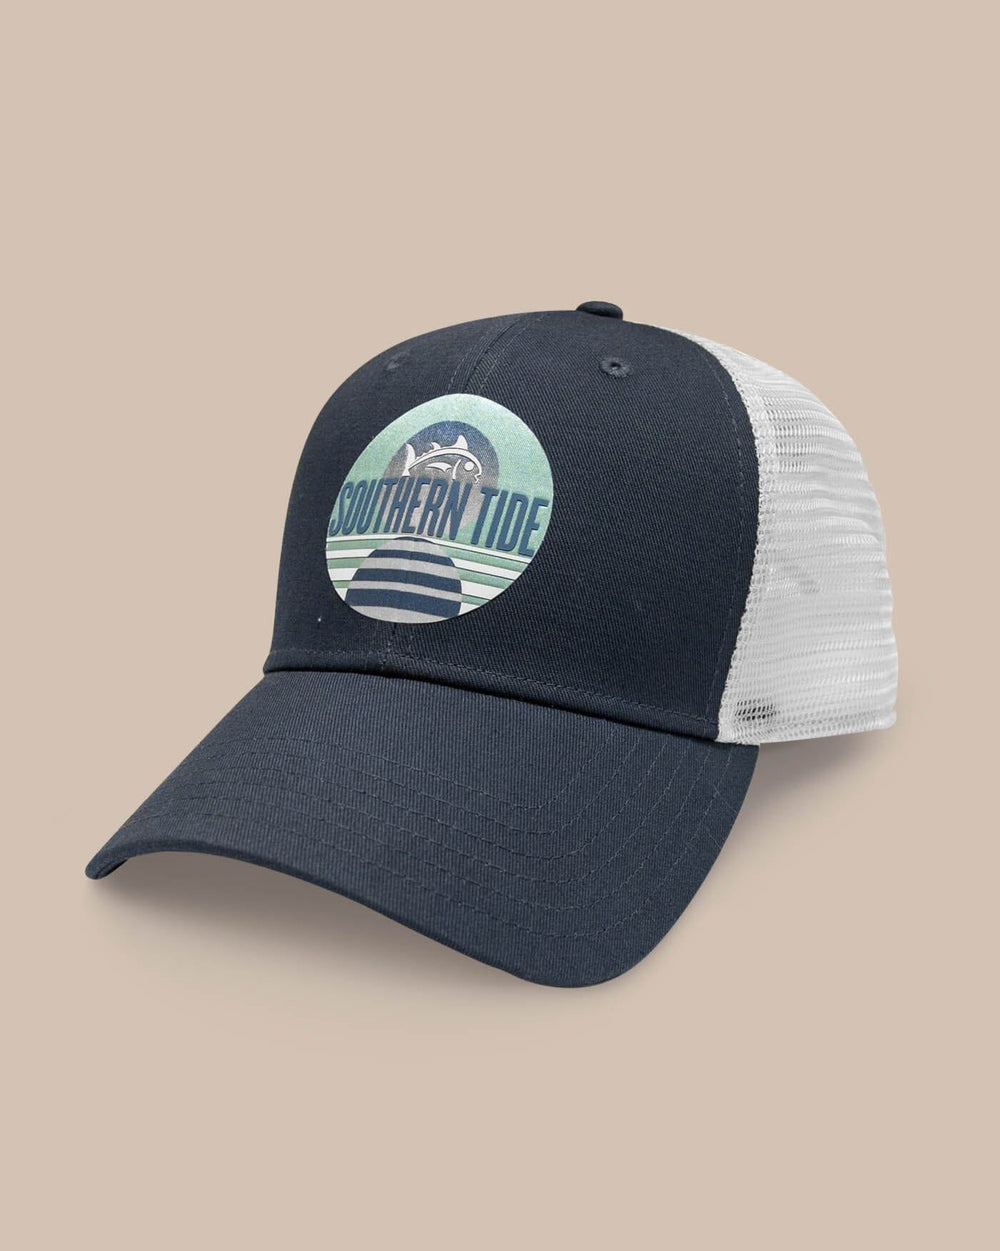 The front view of the Southern Tide Skipjack and Stripes Trucker Hat by Southern Tide - Navy